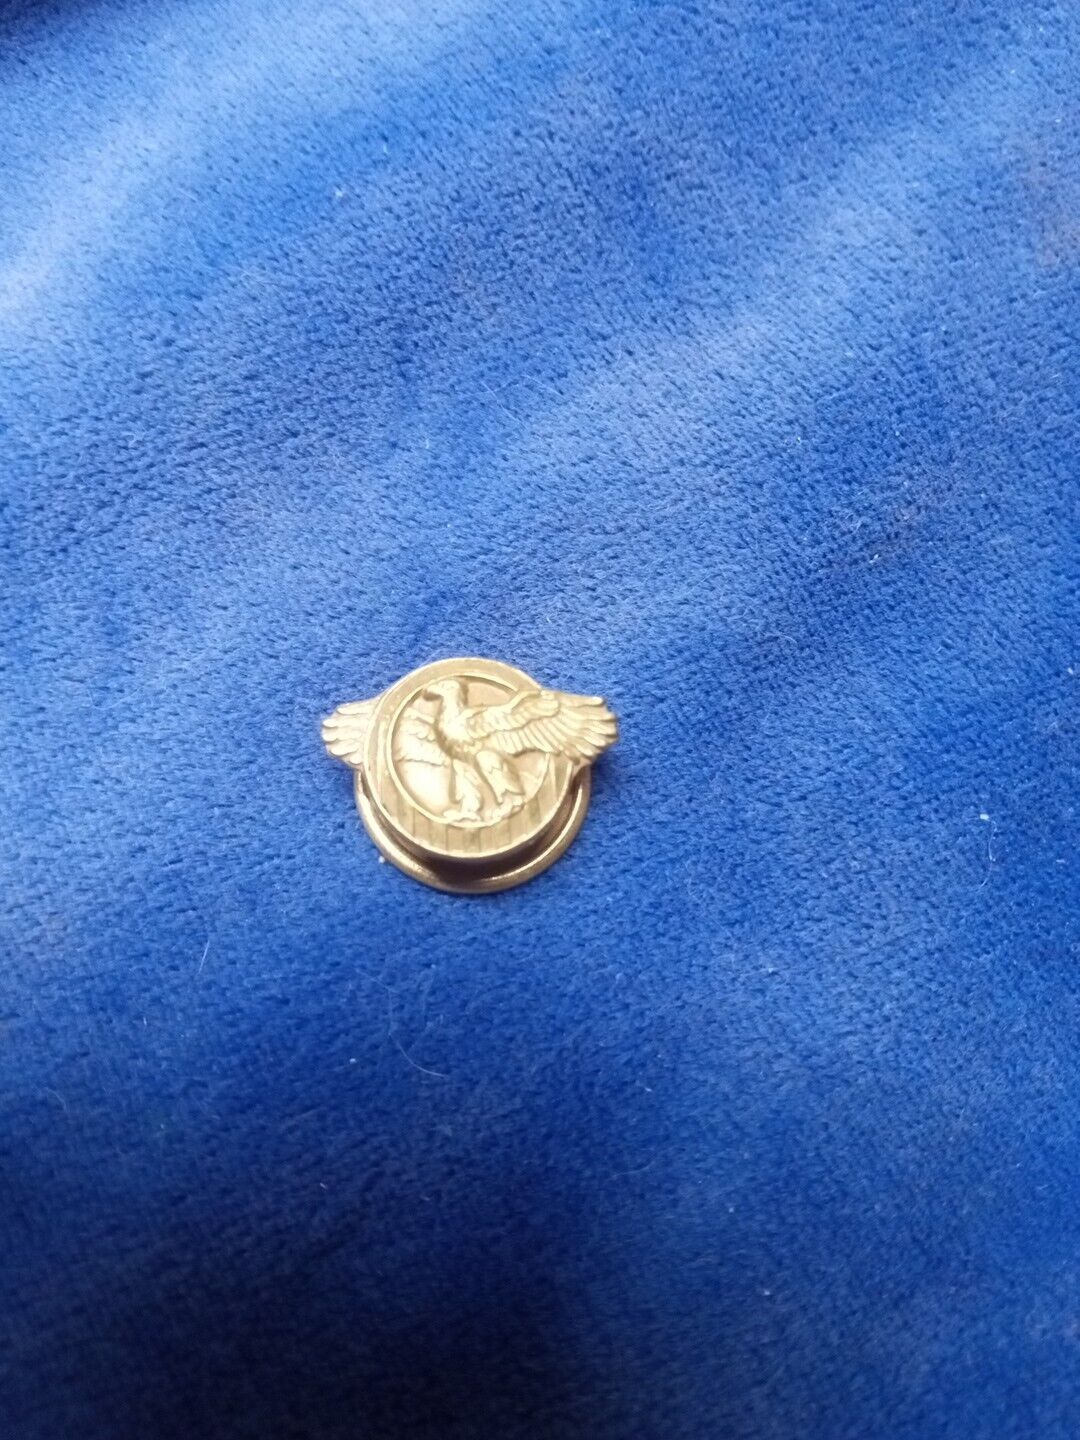 Ruptured Duck Honorable Discharge Lapel Pin/Buttonhole Pin Vintage Nice Conditio